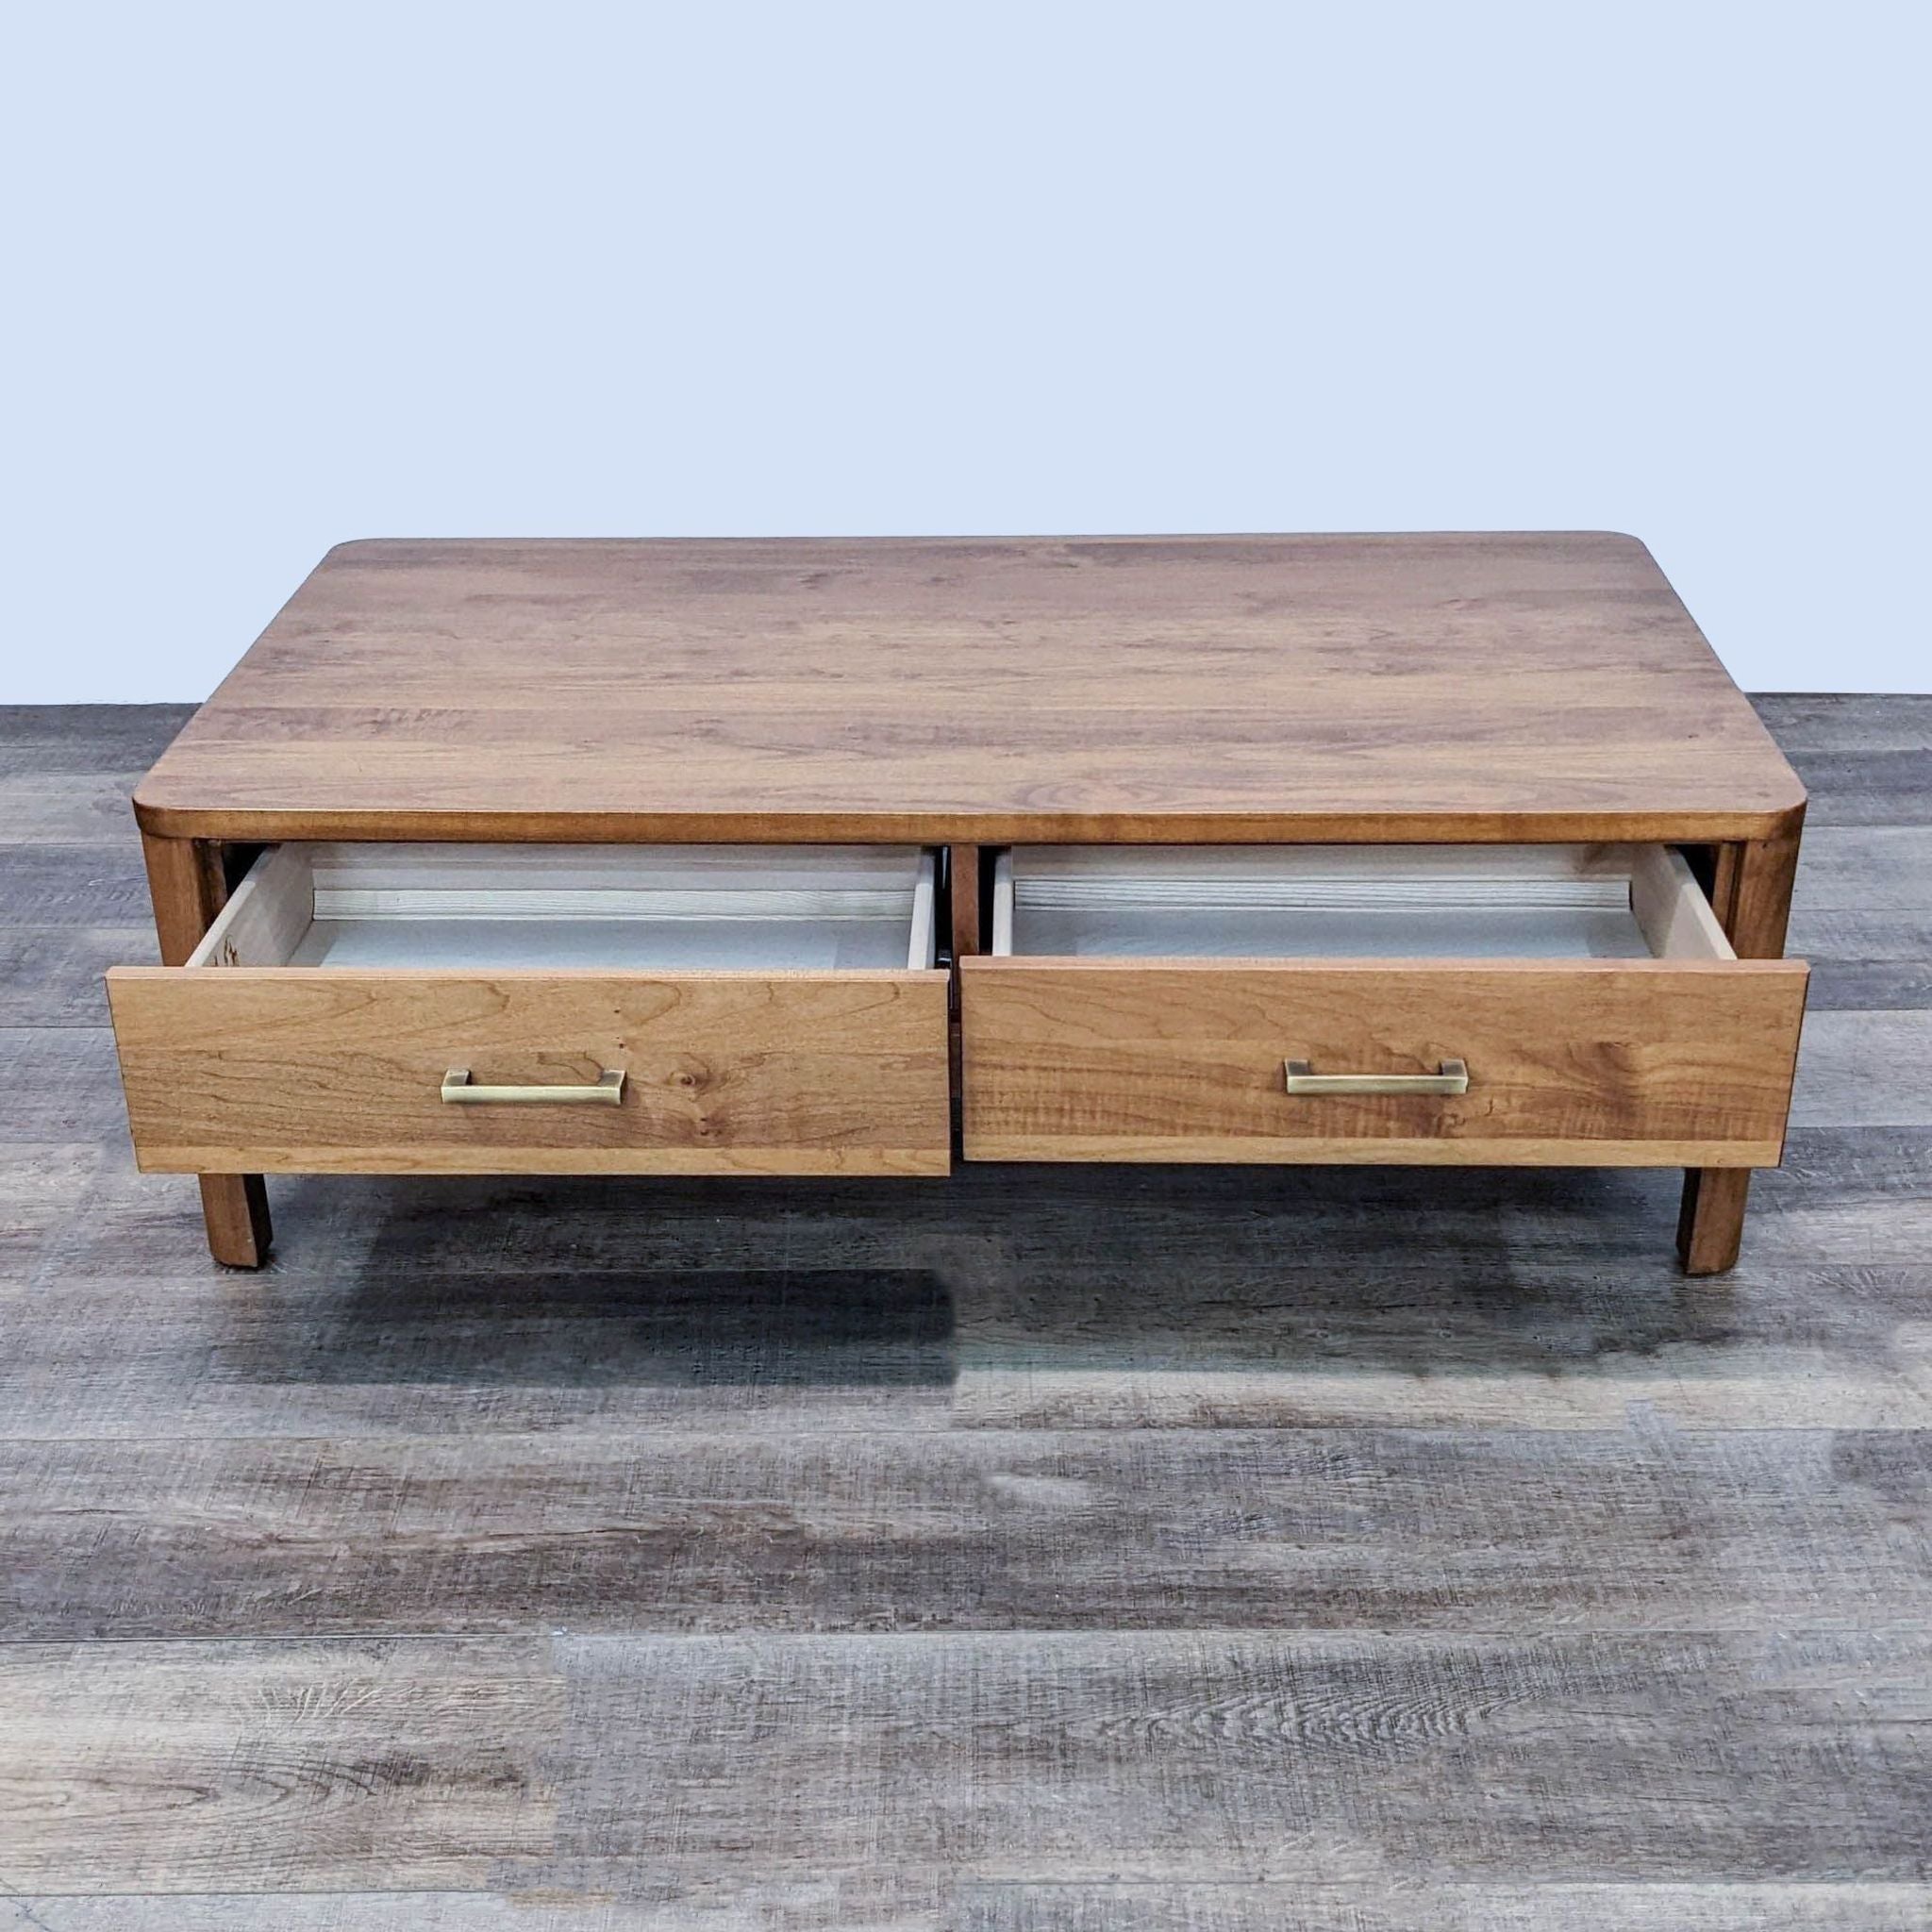 Wood Castle coffee table with two open drawers revealing storage space, placed on a textured floor.